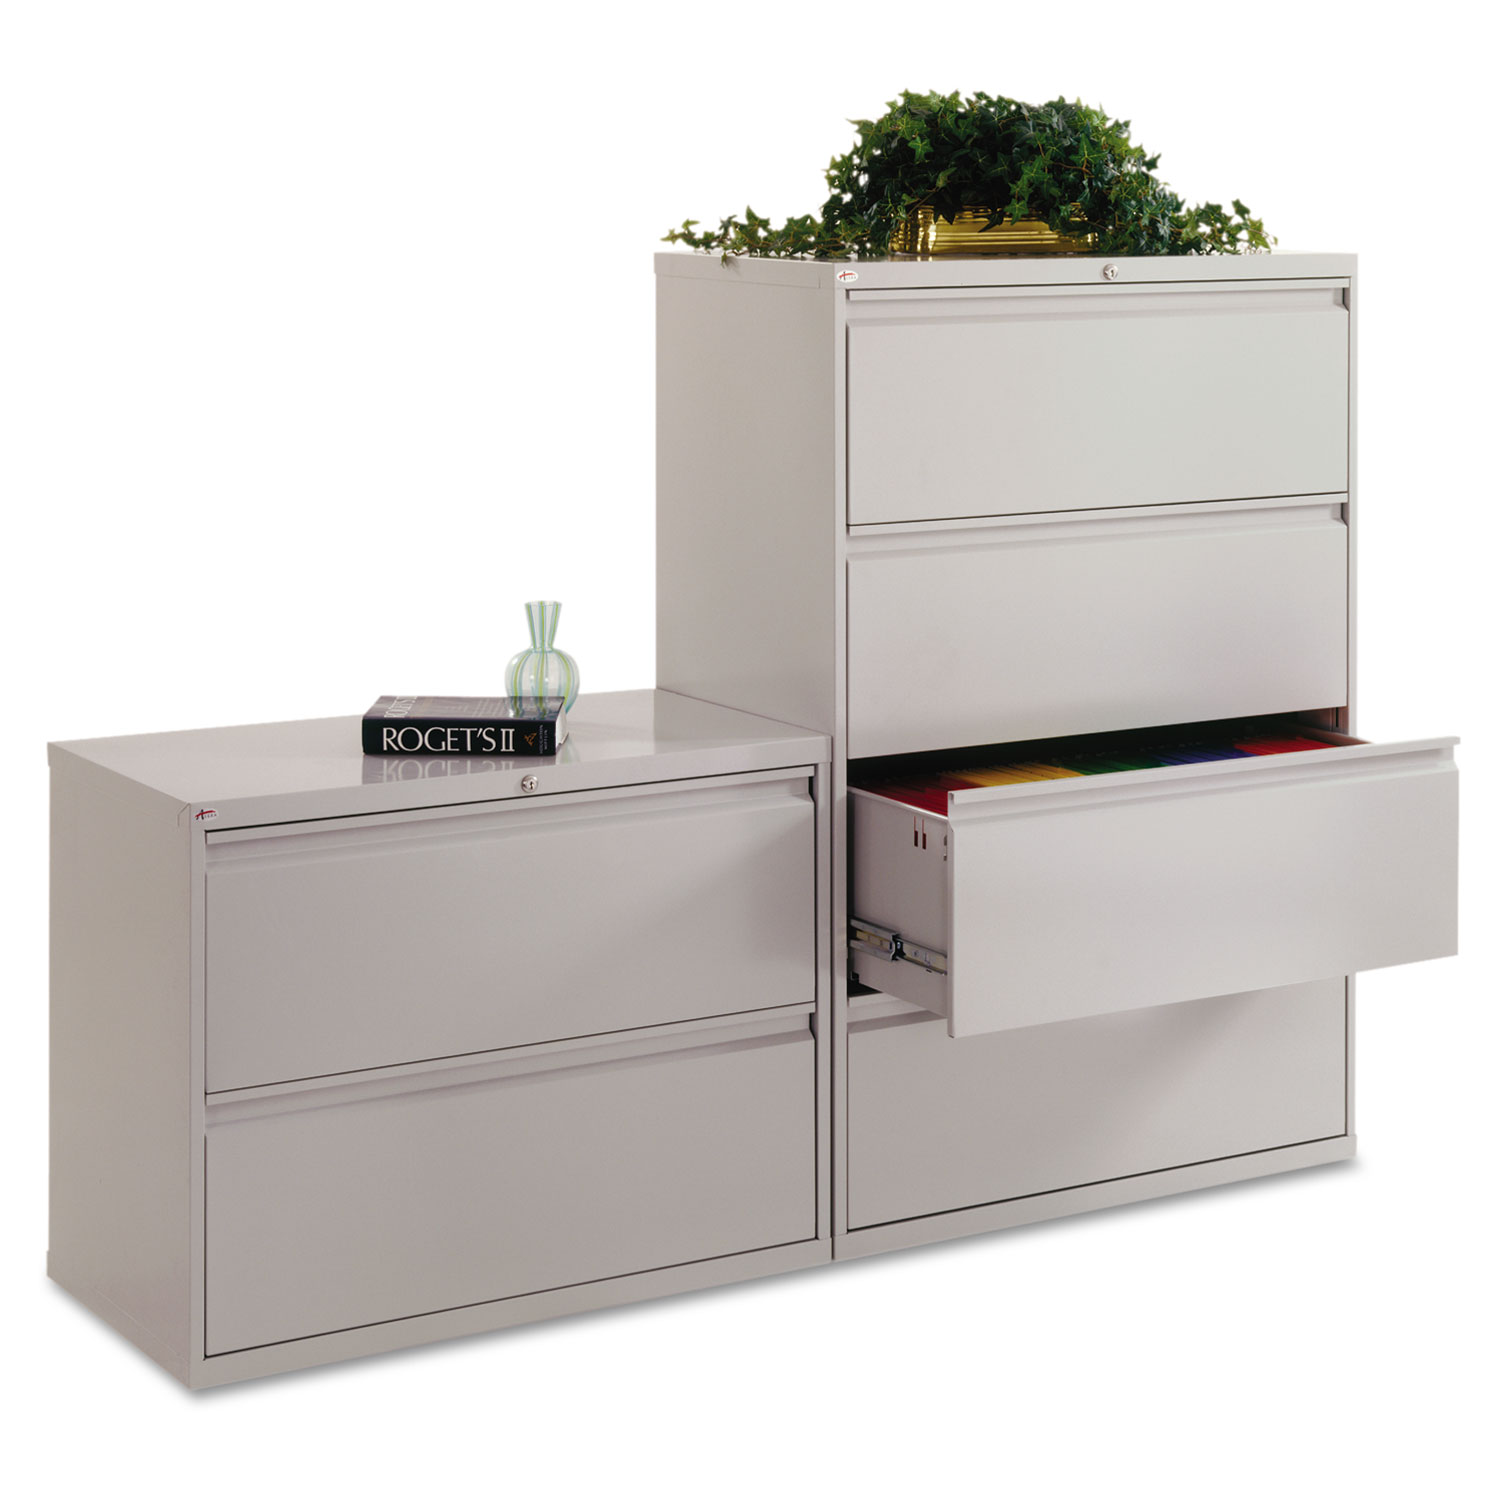 Alera Four-drawer Lateral File Cabinet, 36w X 18d X 52.5h, Light Gray - image 3 of 3